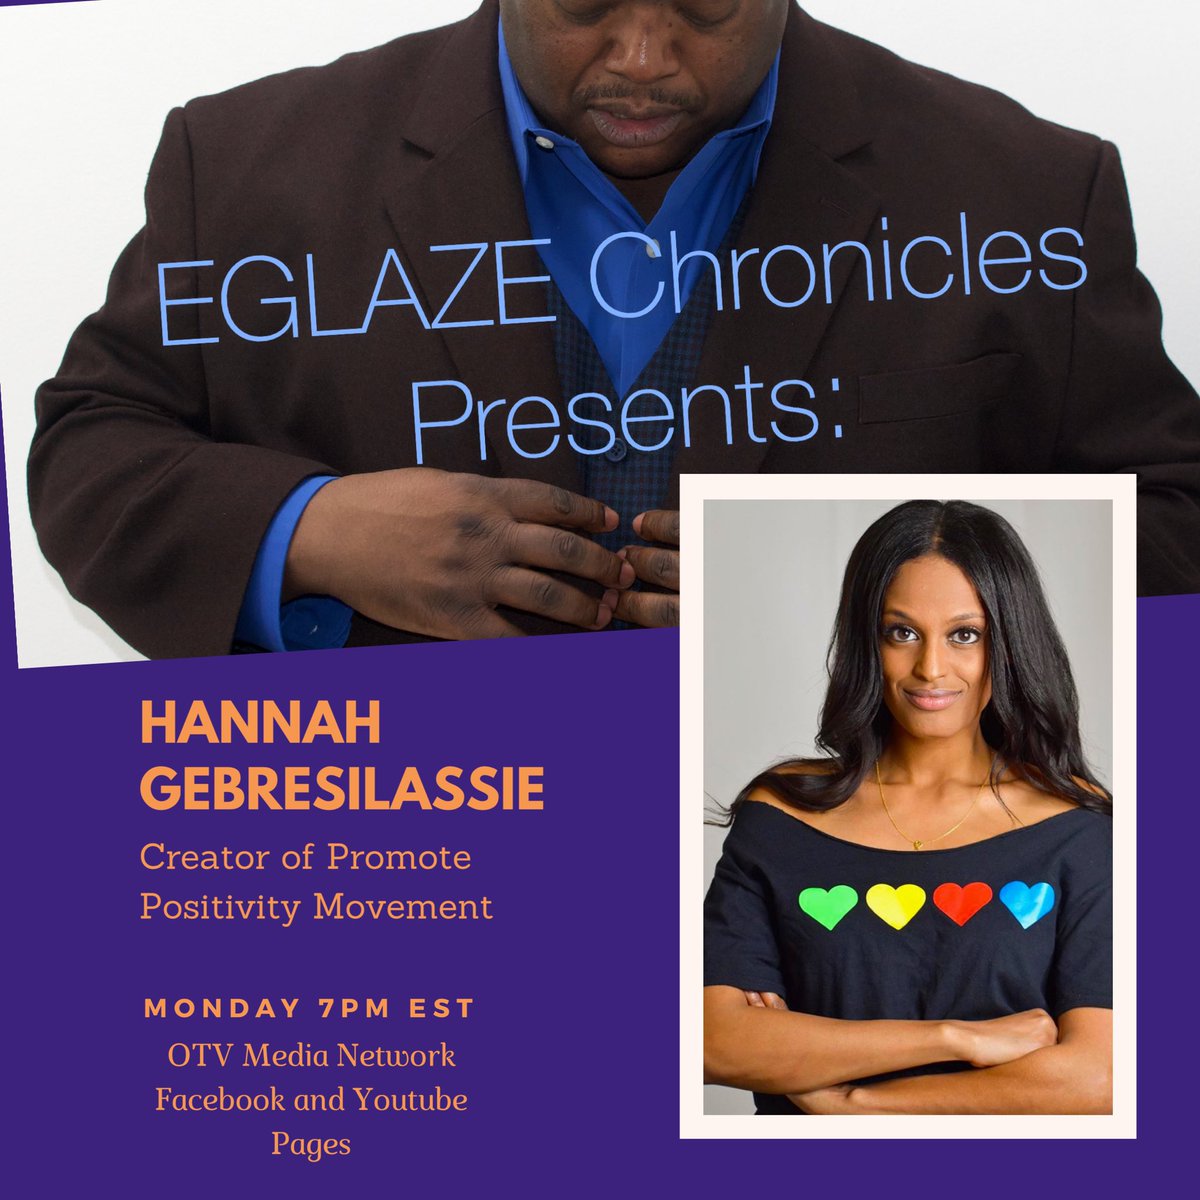 On Monday October 19th The EGlaze Chronicles are happy to welcome Creator of Promote Positivity Movement and #communityactivist @hannahjoyTV to the show! It’s Going to be a great one!! Catch it Monday 10/19 at 7pm est on @MediaOtv #Facebook and #Youtube